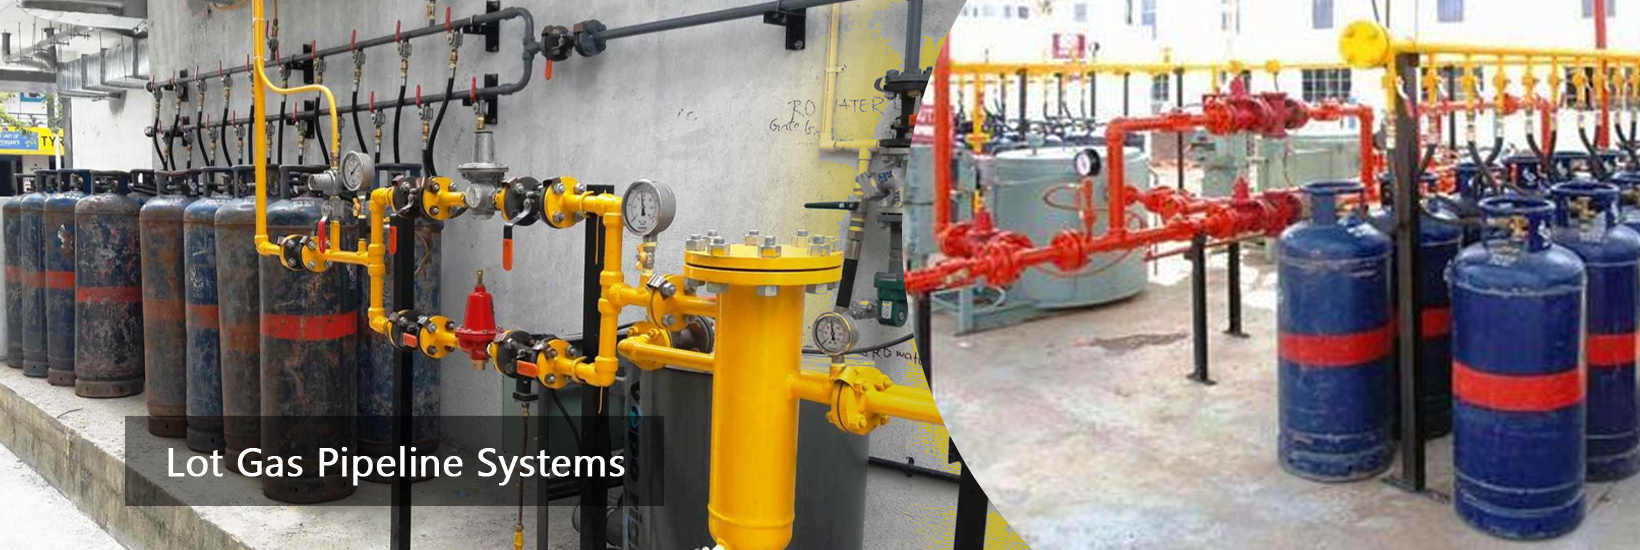 Lot Gas Pipeline Systems, LPG LOT Gas Pipeline Installation Service, Lpg Gas Pipe Line Installation Services For Industries, Residential Gas Pipe Line Installation Service,Gas Pipe Line Installation Services For Hospital, Copper Pipeline, S.S Piping, All Type Of Pipeline, Copper Pipeline Installation Services For Hospital